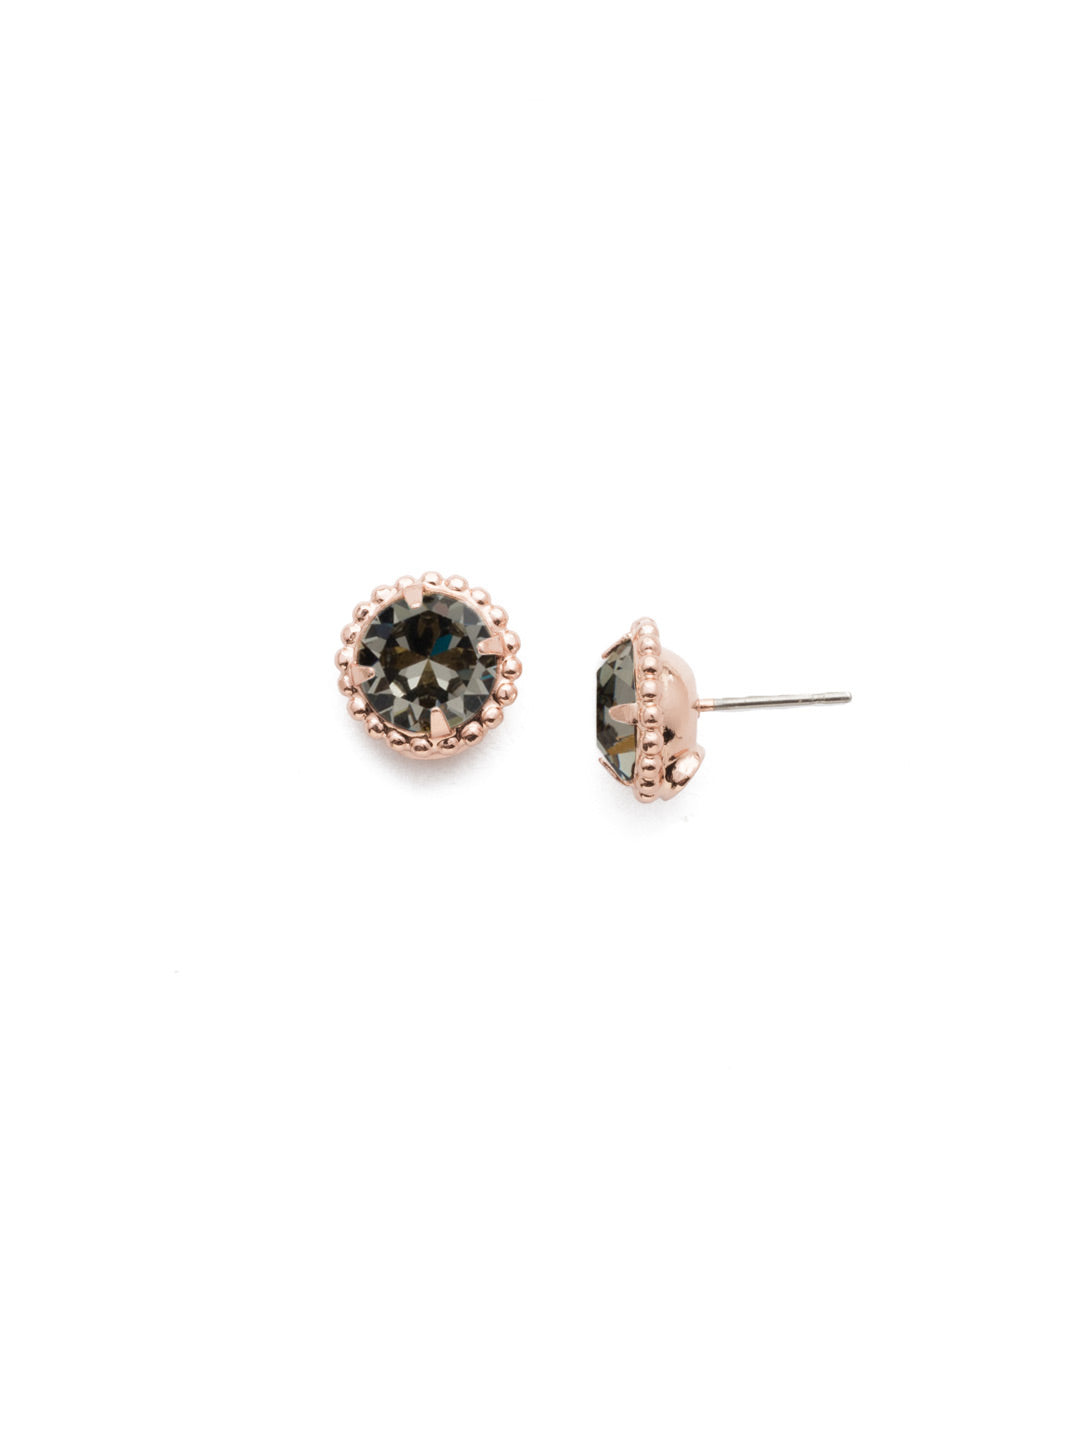 Simplicity Stud Earrings - EBY38RGBD - <p>A timeless classic, the Simplicity Stud Earrings feature round cut crystals in a variety of colors; accented with a halo of metal beaded detail. Need help picking a stud? <a href="https://www.sorrelli.com/blogs/sisterhood/round-stud-earrings-101-a-rundown-of-sizes-styles-and-sparkle">Check out our size guide!</a> From Sorrelli's Black Diamond collection in our Rose Gold-tone finish.</p>